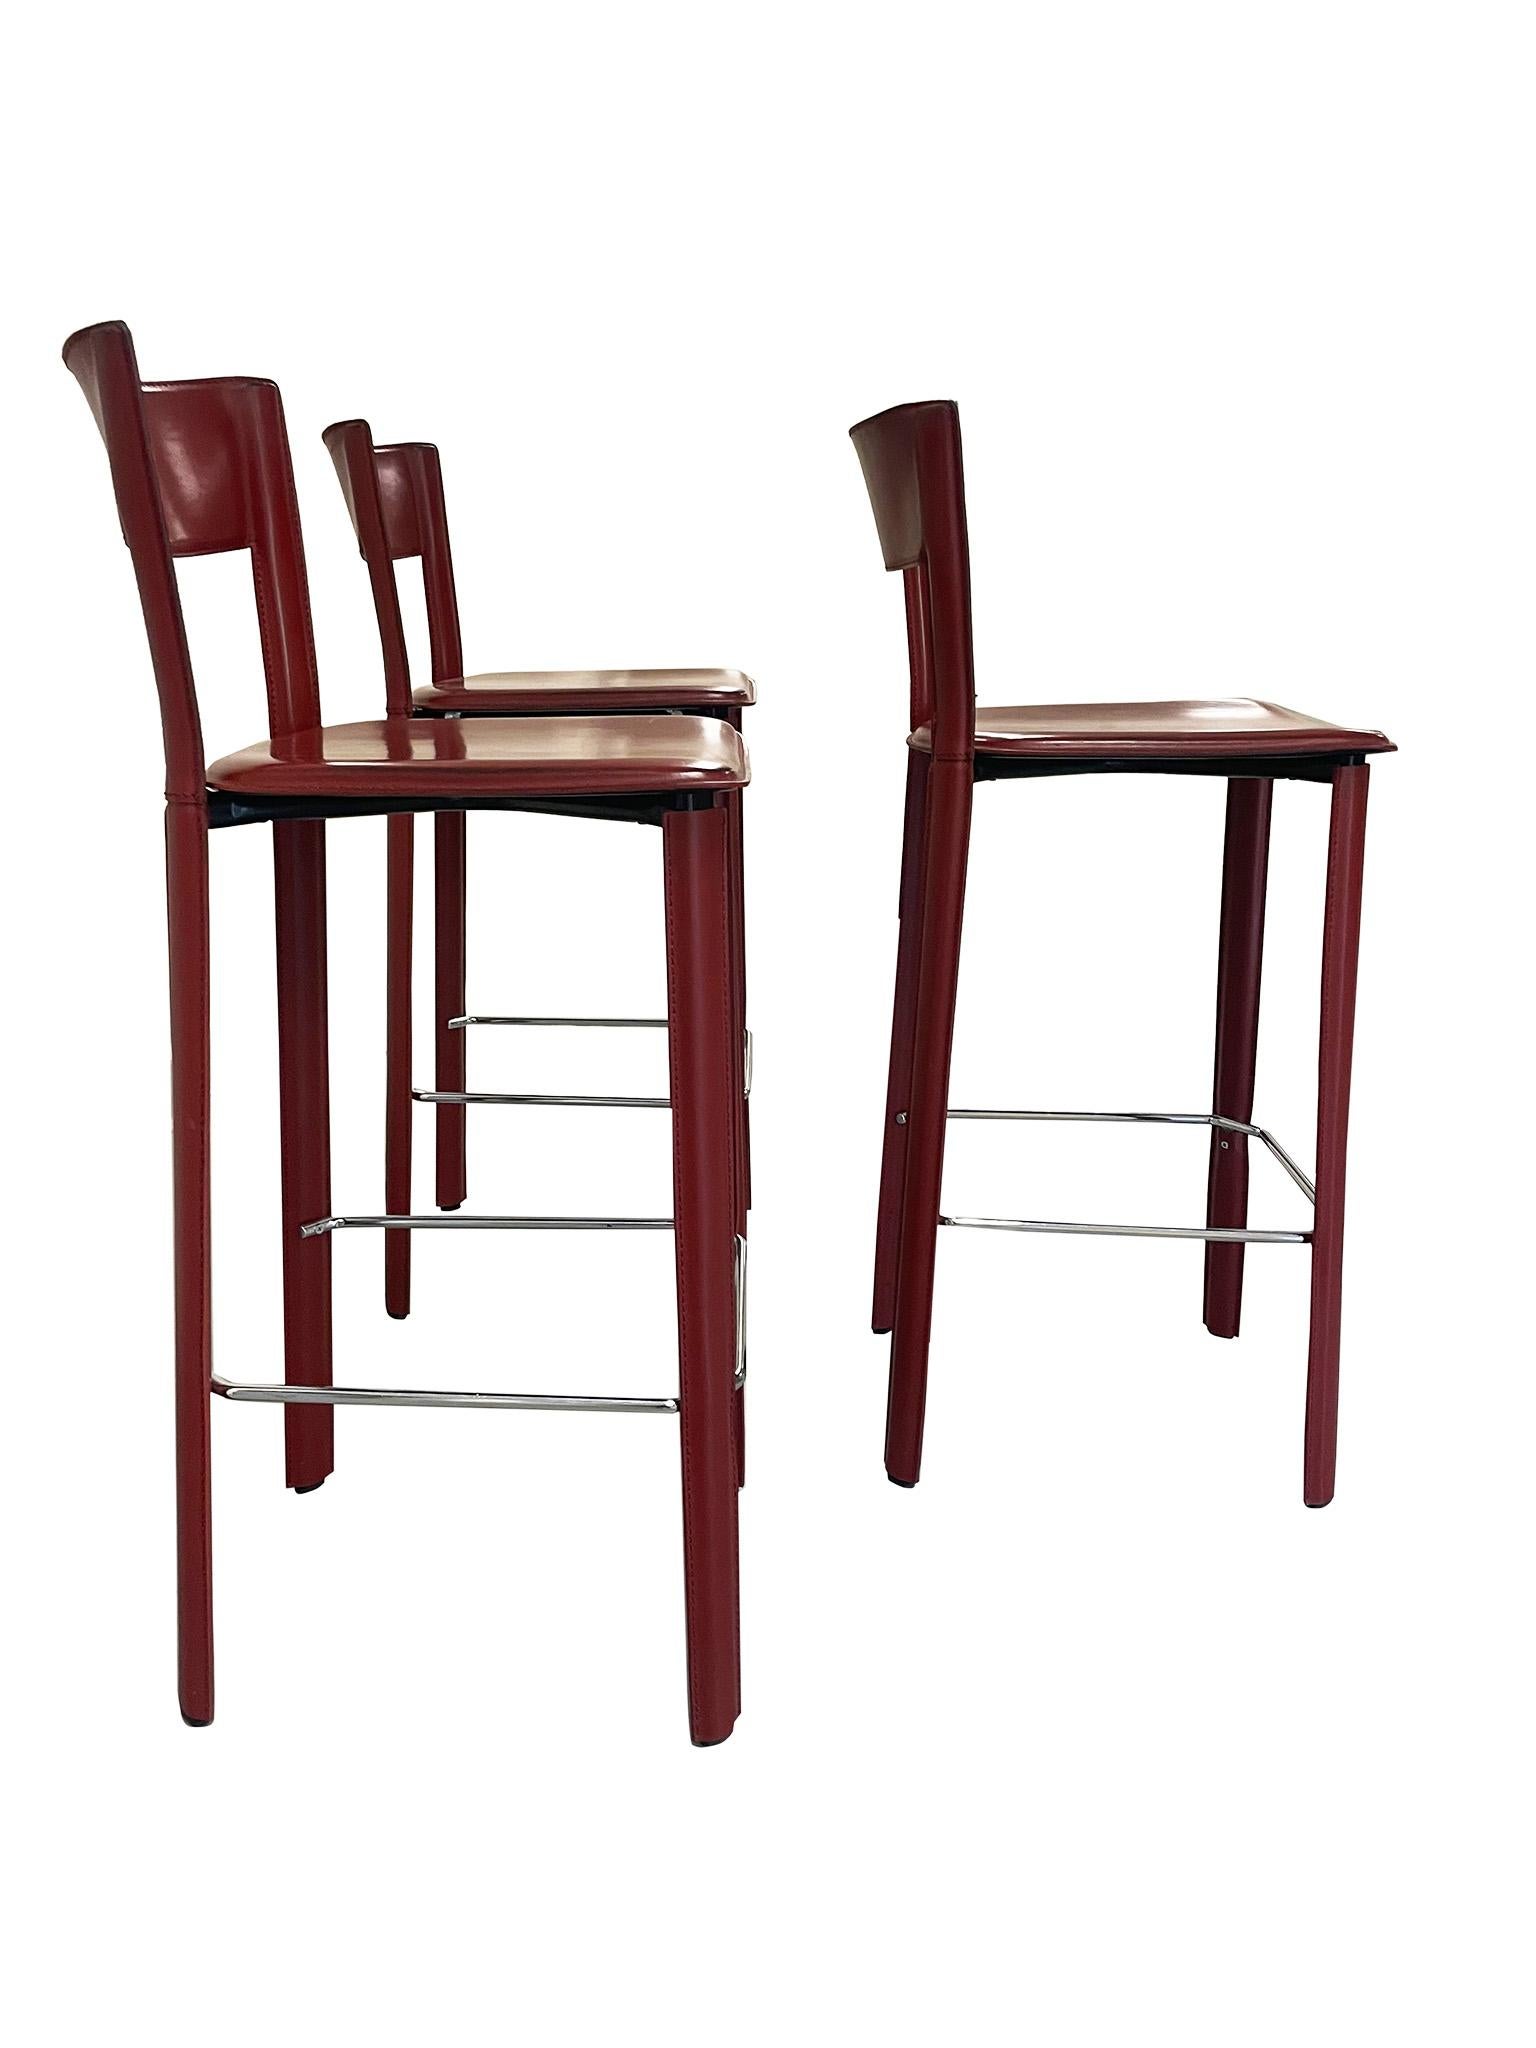  Chic set of three Bottega bar stools by iconic Italian furniture maker Frag. Crafted in rich red leather wrapped on a metal frame, these stools were designed with luxury and comfort in mind. Characterized by their low profile, curved open back, and